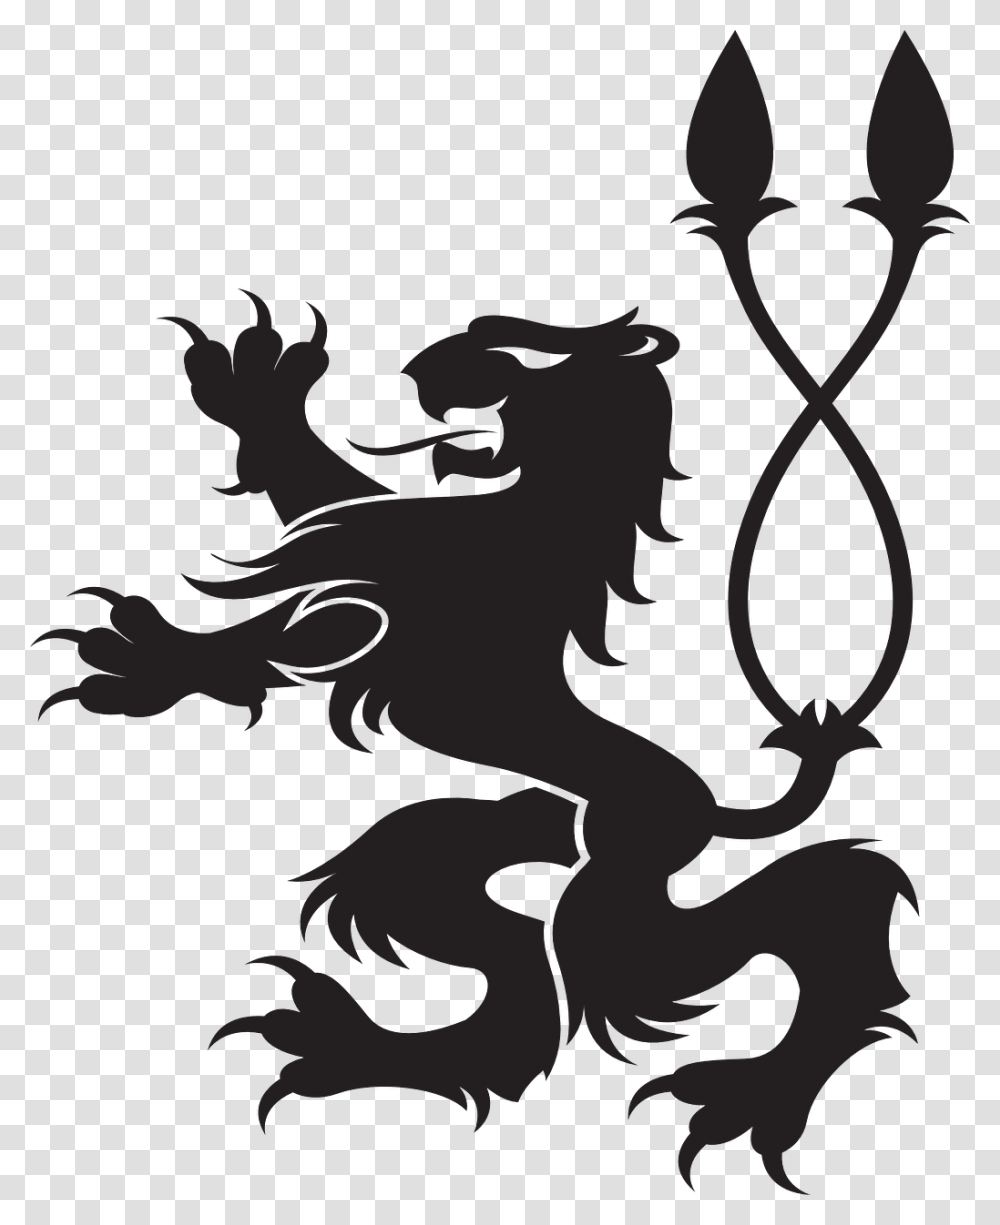 Lion Heraldic Animal Double Tail Free Picture Lion Coat Of Arms, Dragon, Silhouette, Stencil Transparent Png